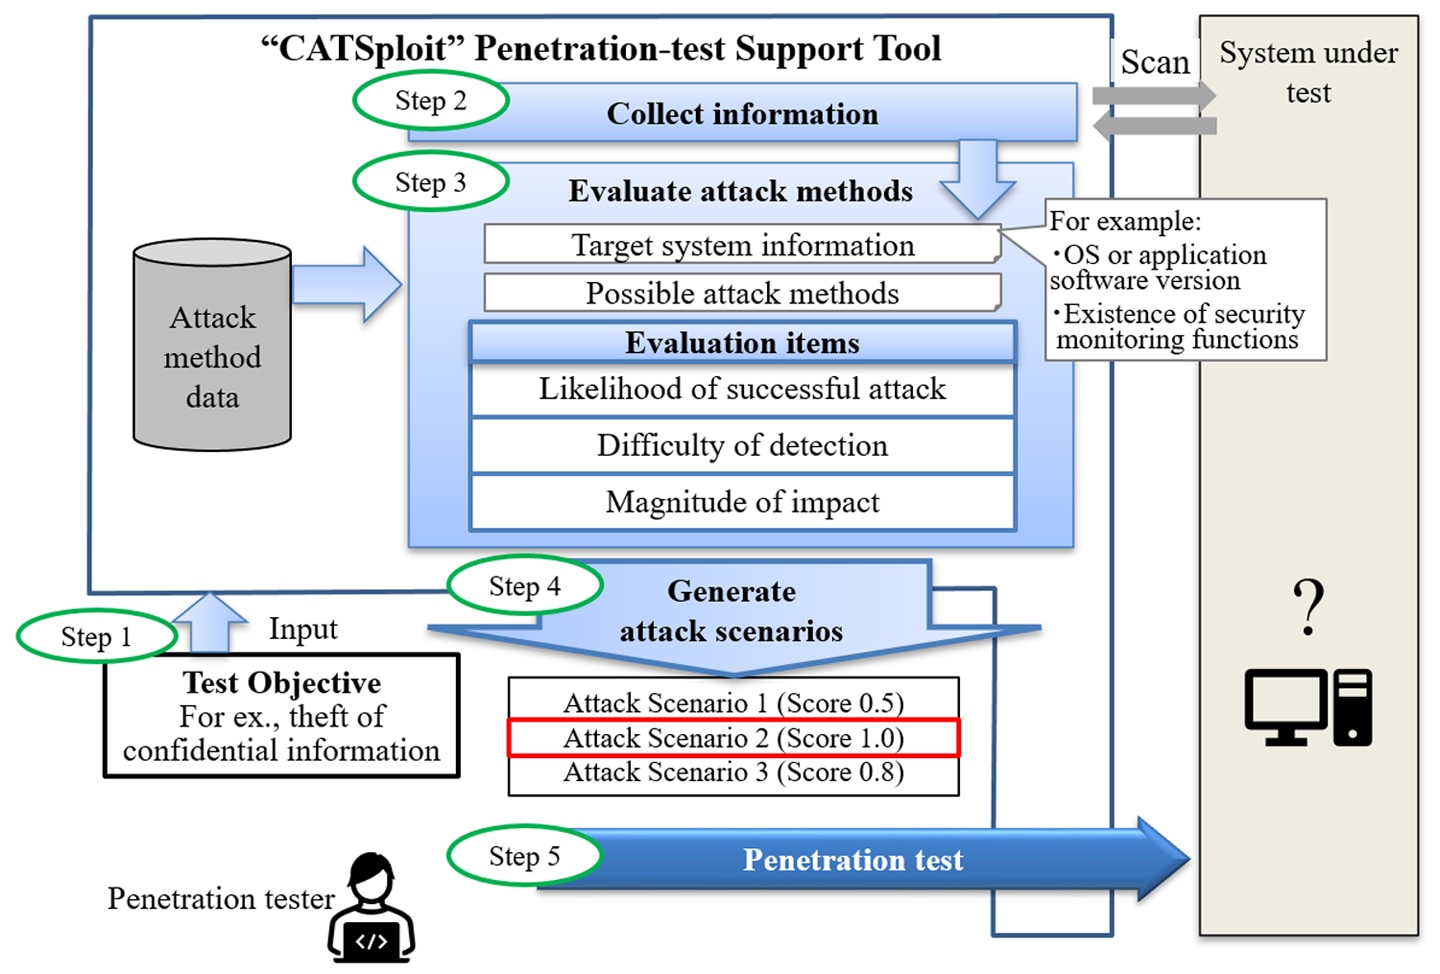 Usage example of the support tool during penetration testing